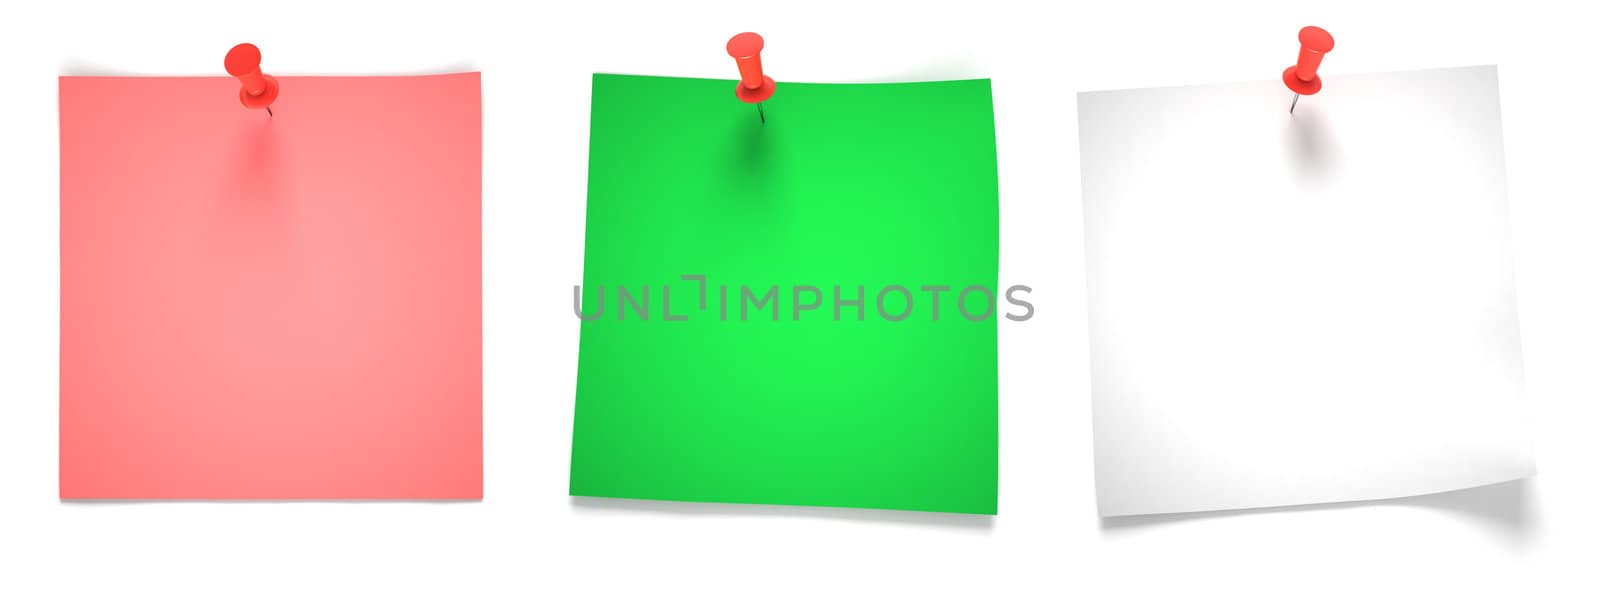 Three multicolored note papers attached with red pins